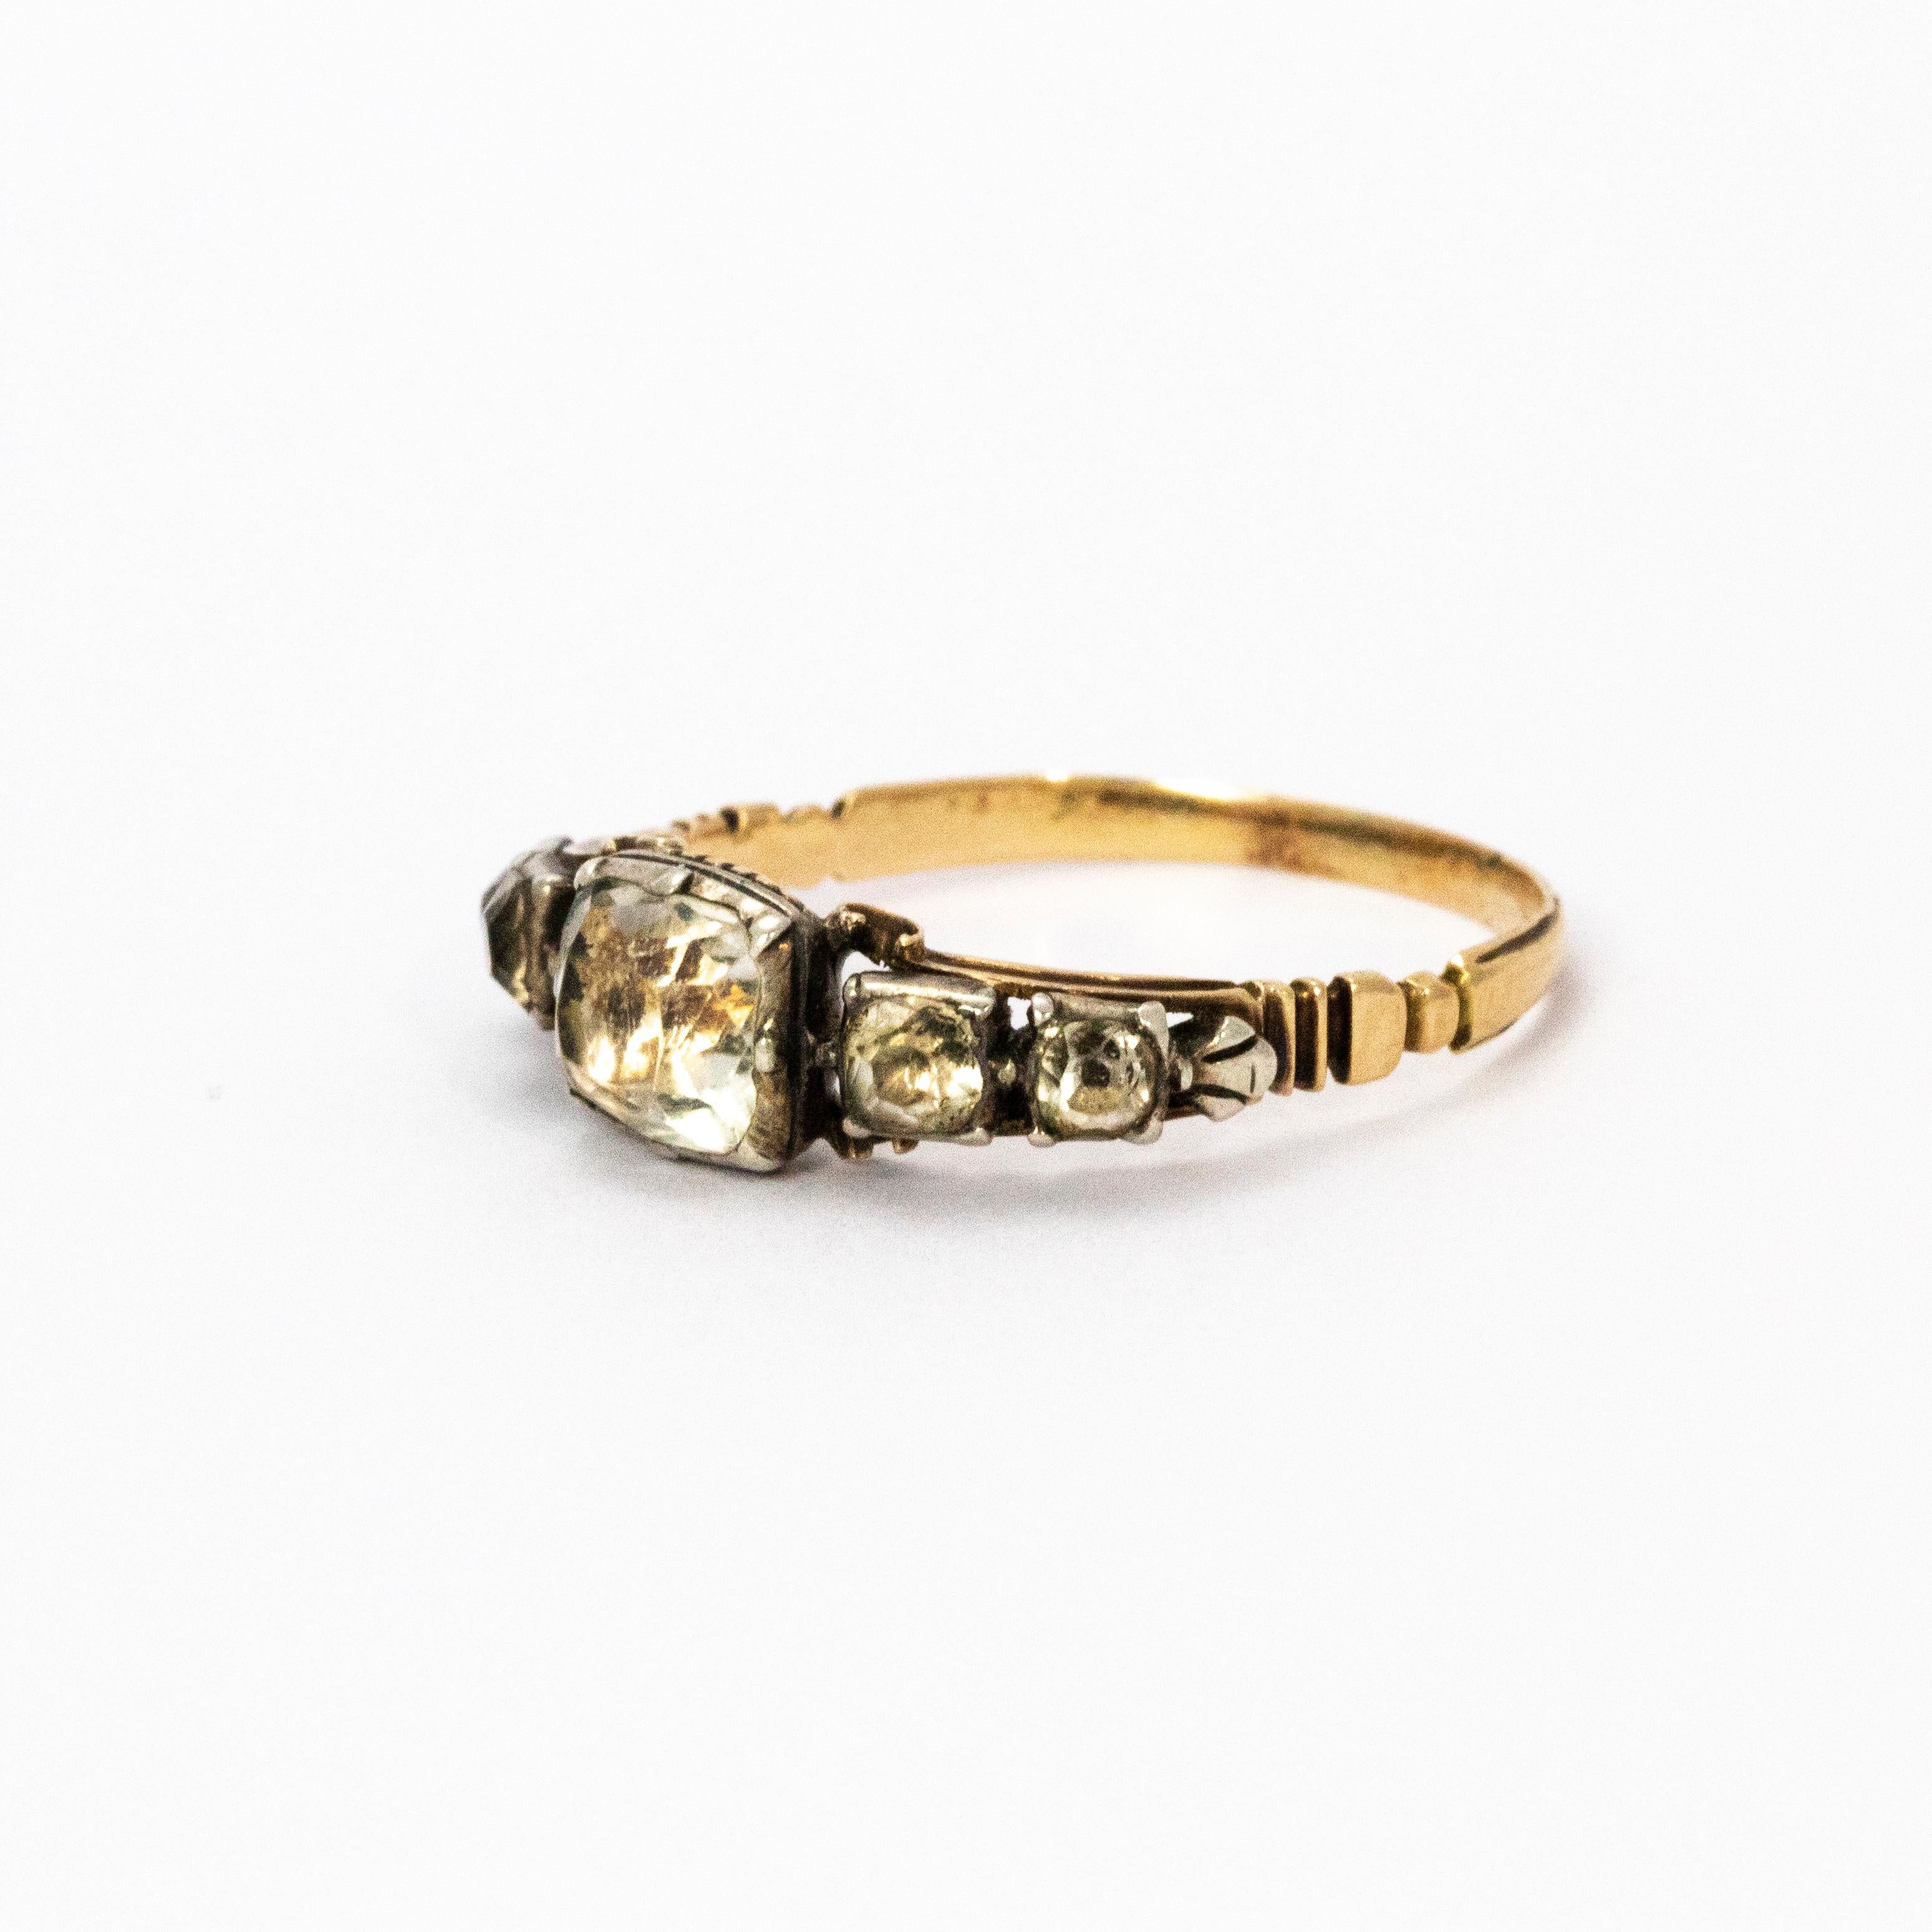 A very fine Georgian ring set with five stunning graduated crystals. Modelled in 15 karat yellow gold. Dated to 1750 during the reign of King George II.

Ring Size: P or 8